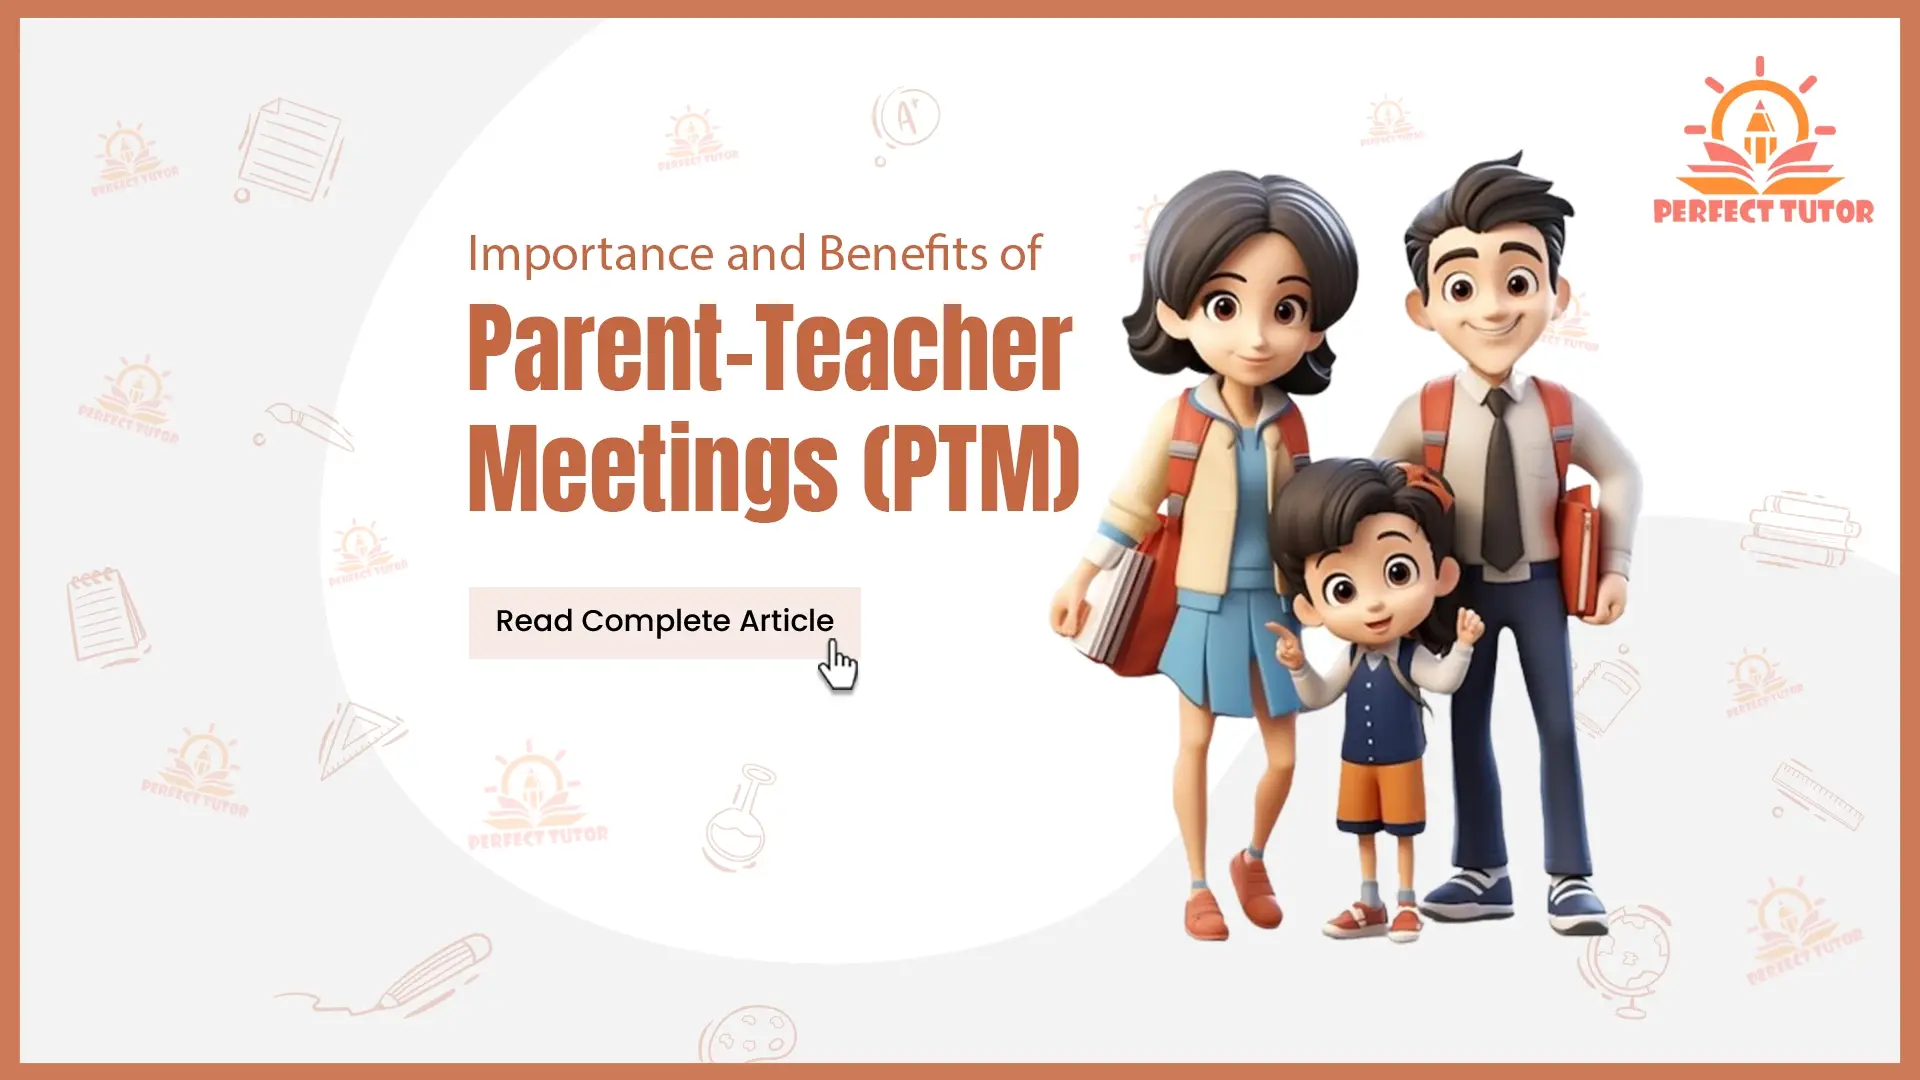 Importance and Benefits of Parent-Teacher Meetings (PTM)